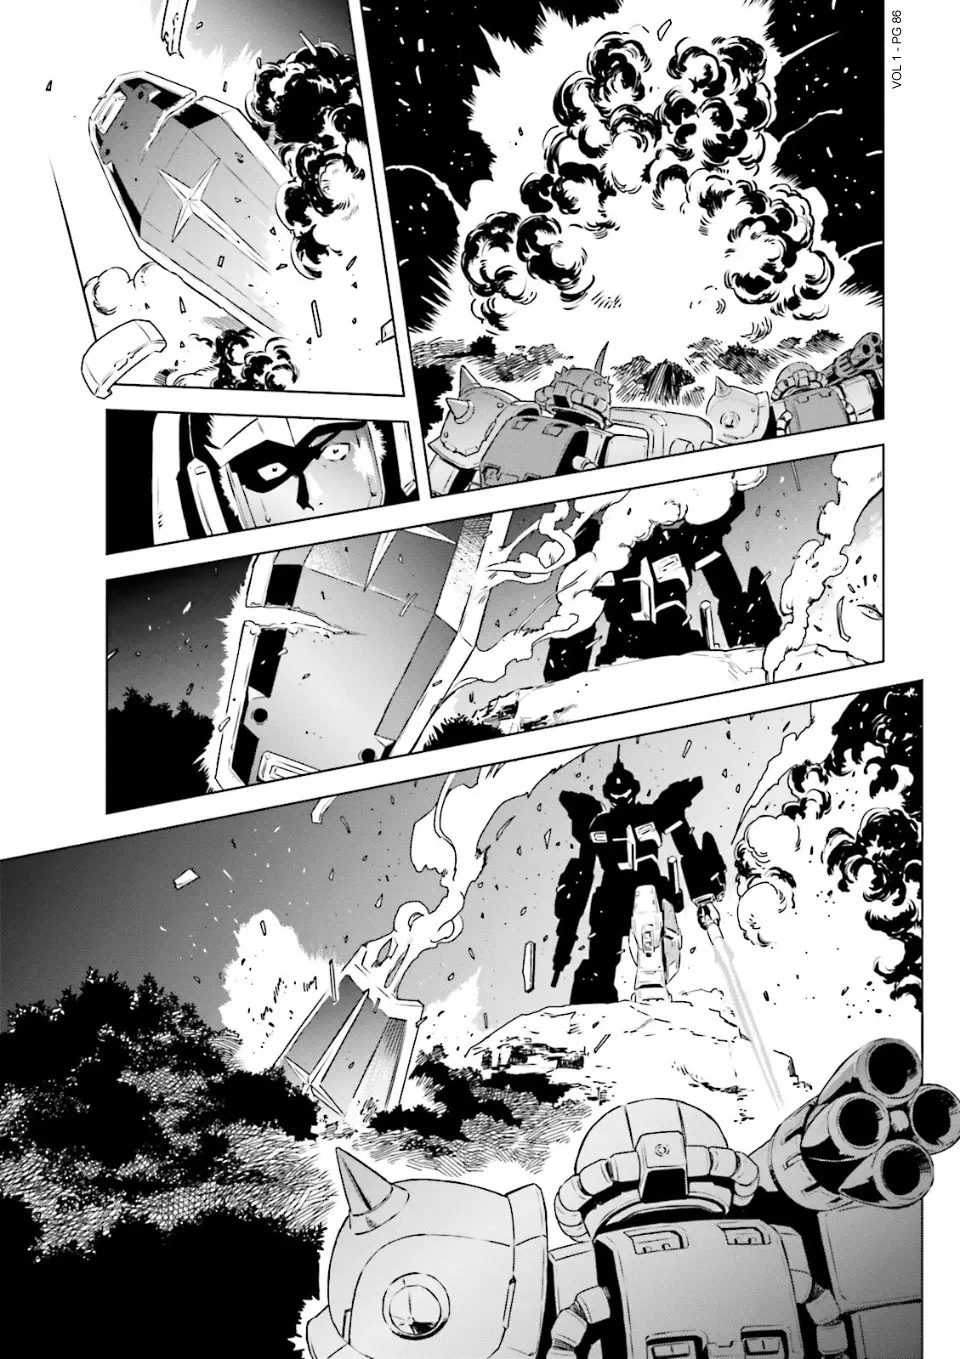 Mobile Suit Gundam Side Story - Missing Link - 3 page 21-0fabf35f